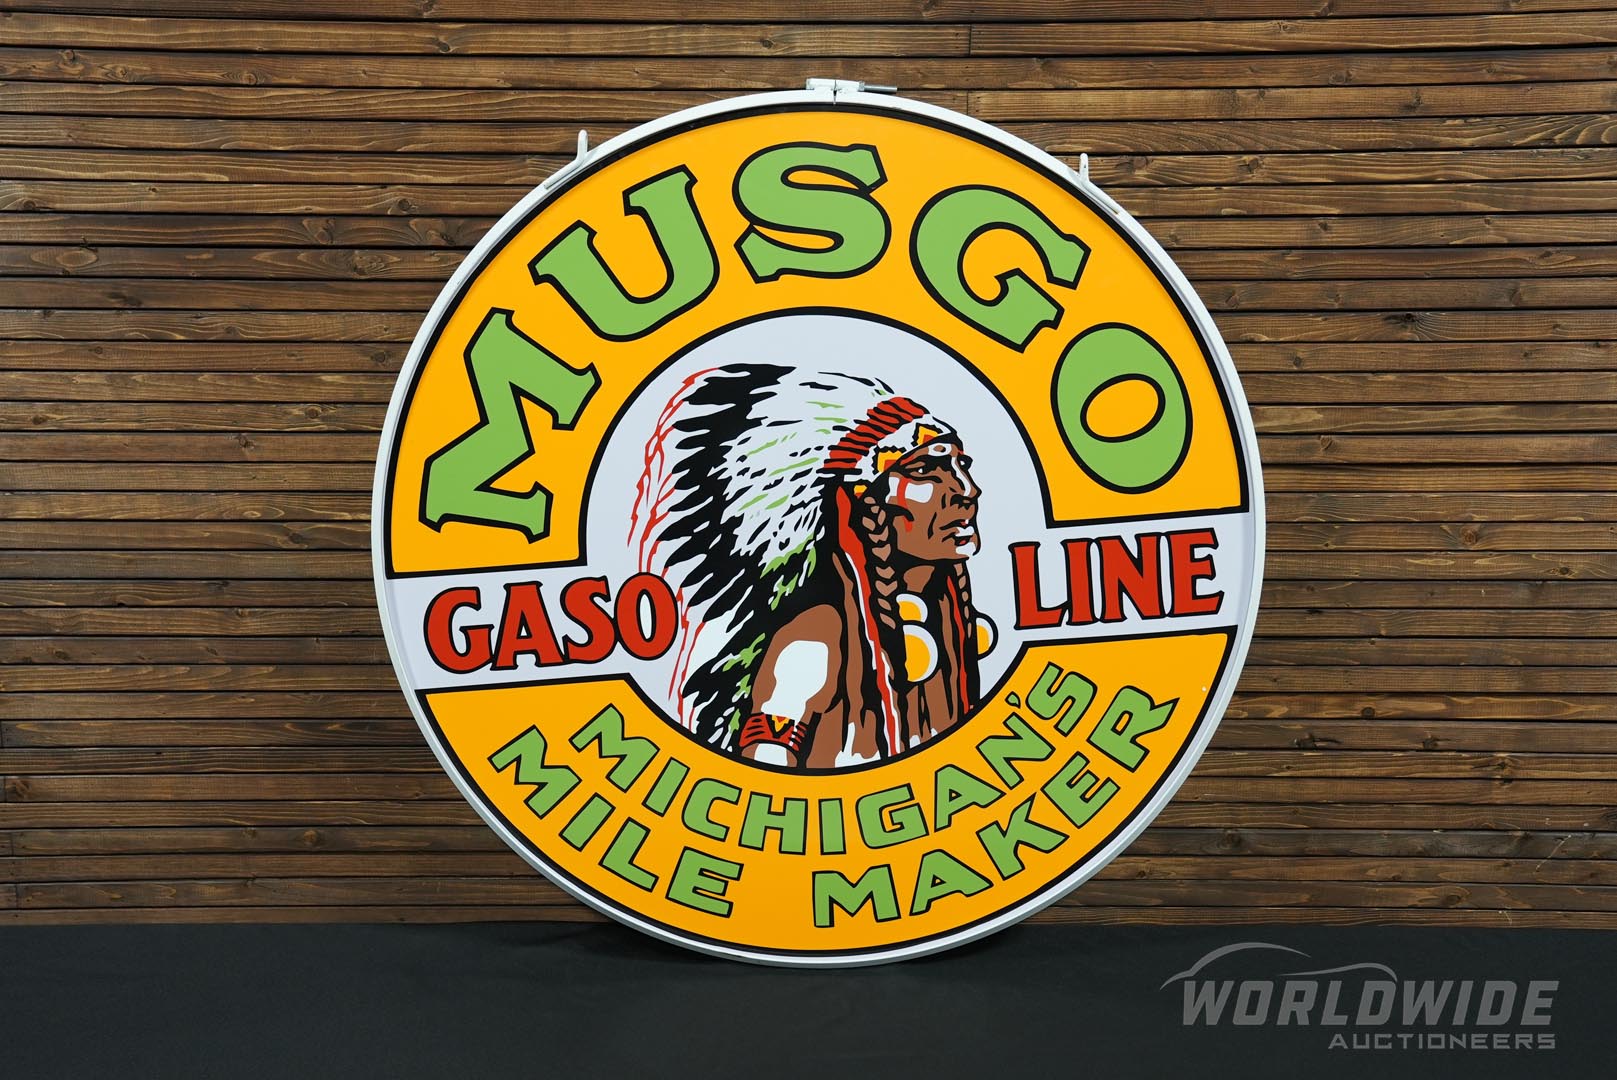 Musgo Gasoline Double-Sided Replica Sign